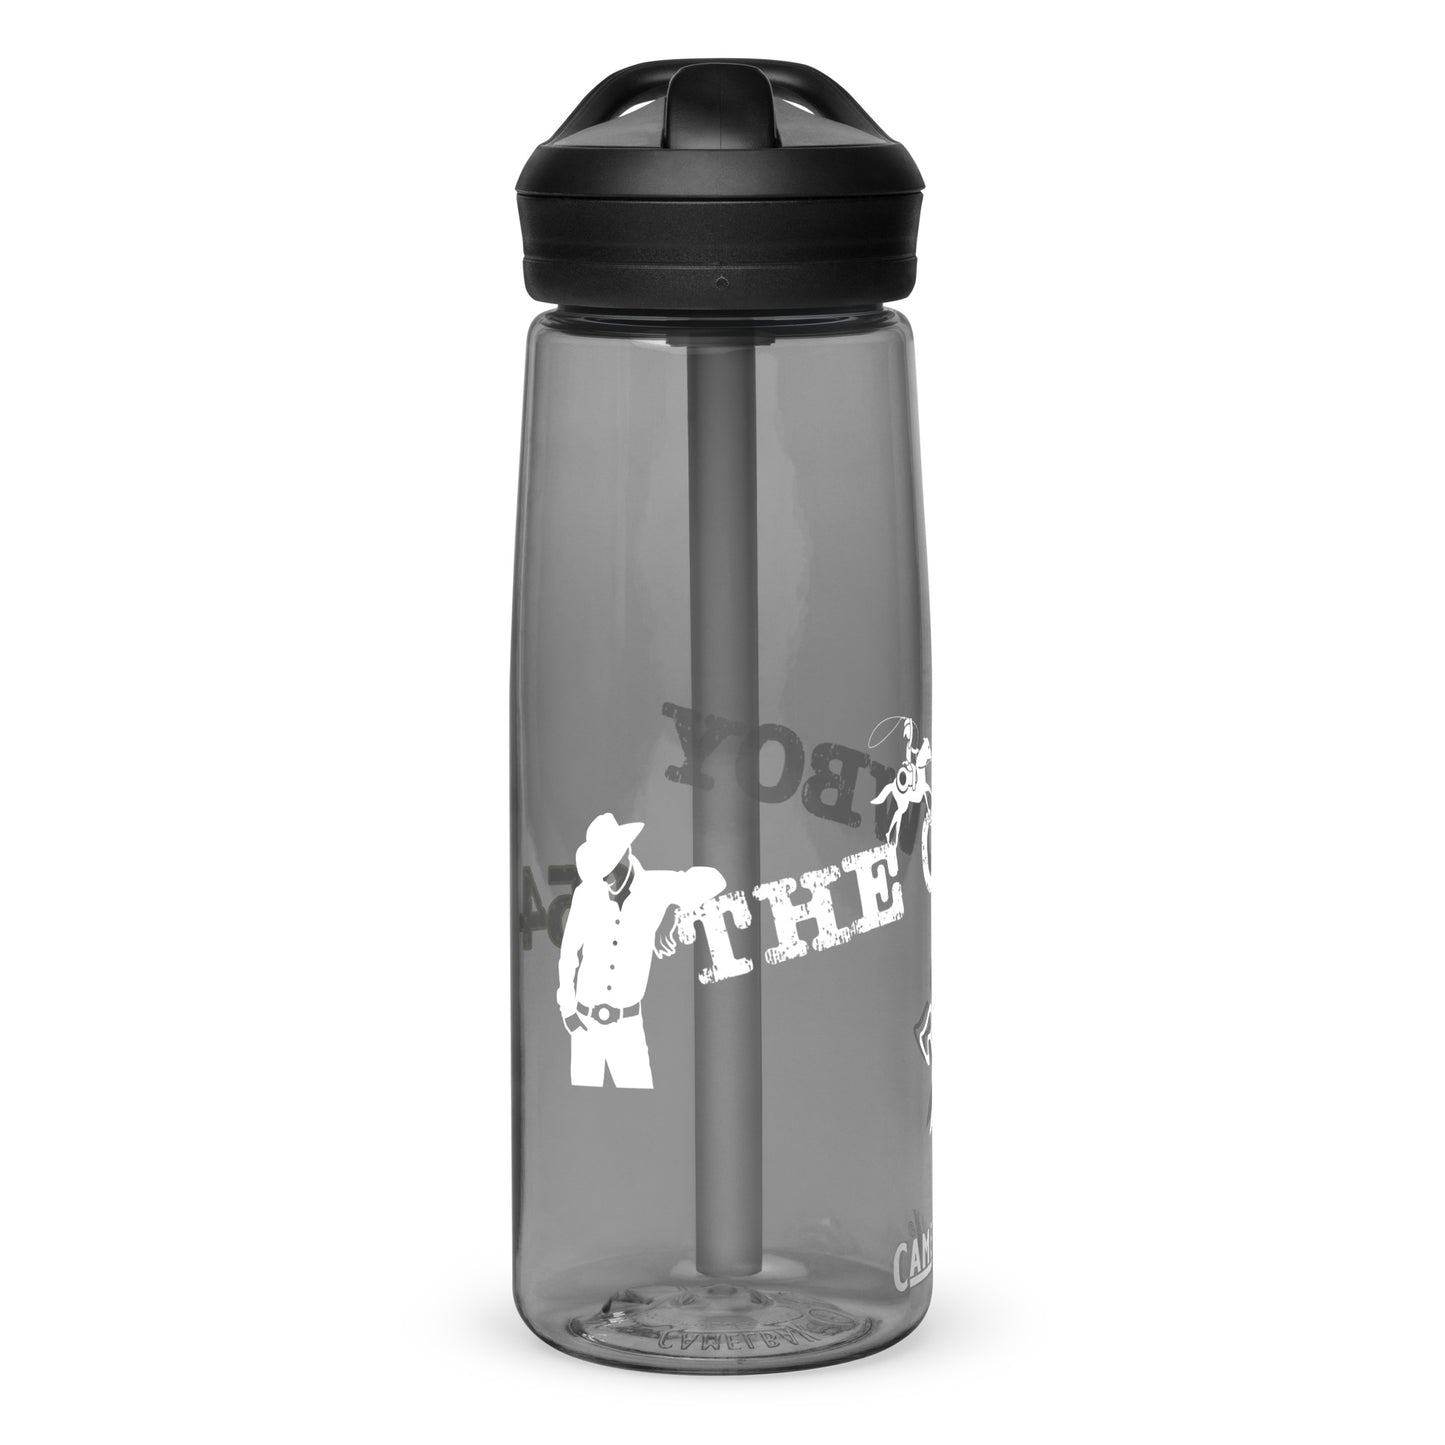 The Cowboy 954 Signature Sports water bottle